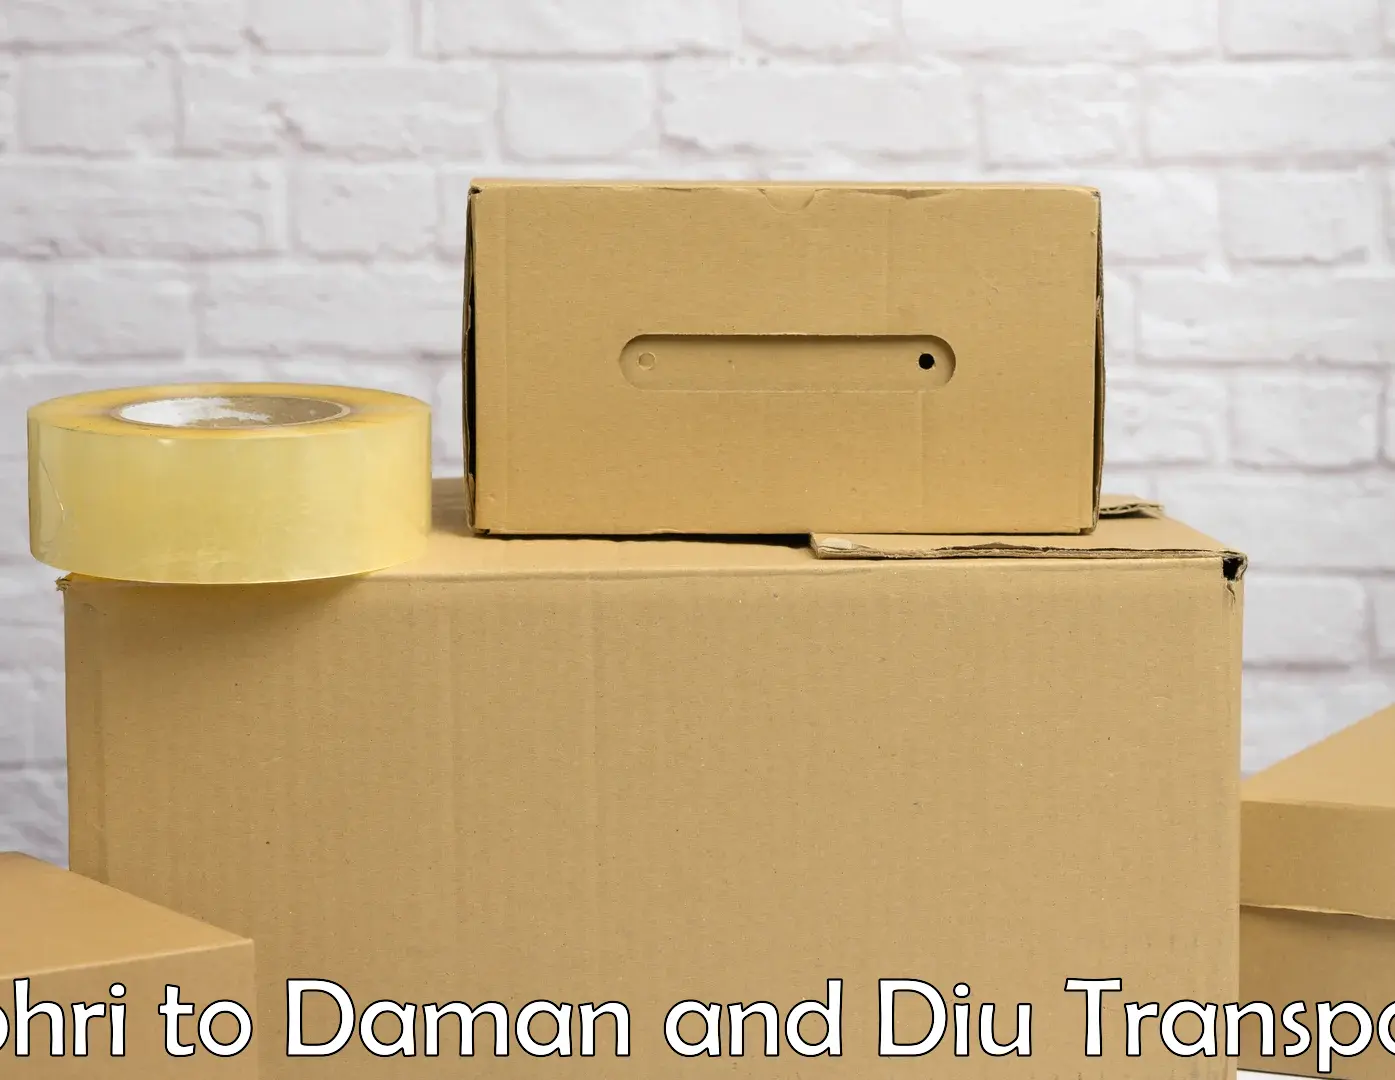 Container transport service Bohri to Daman and Diu